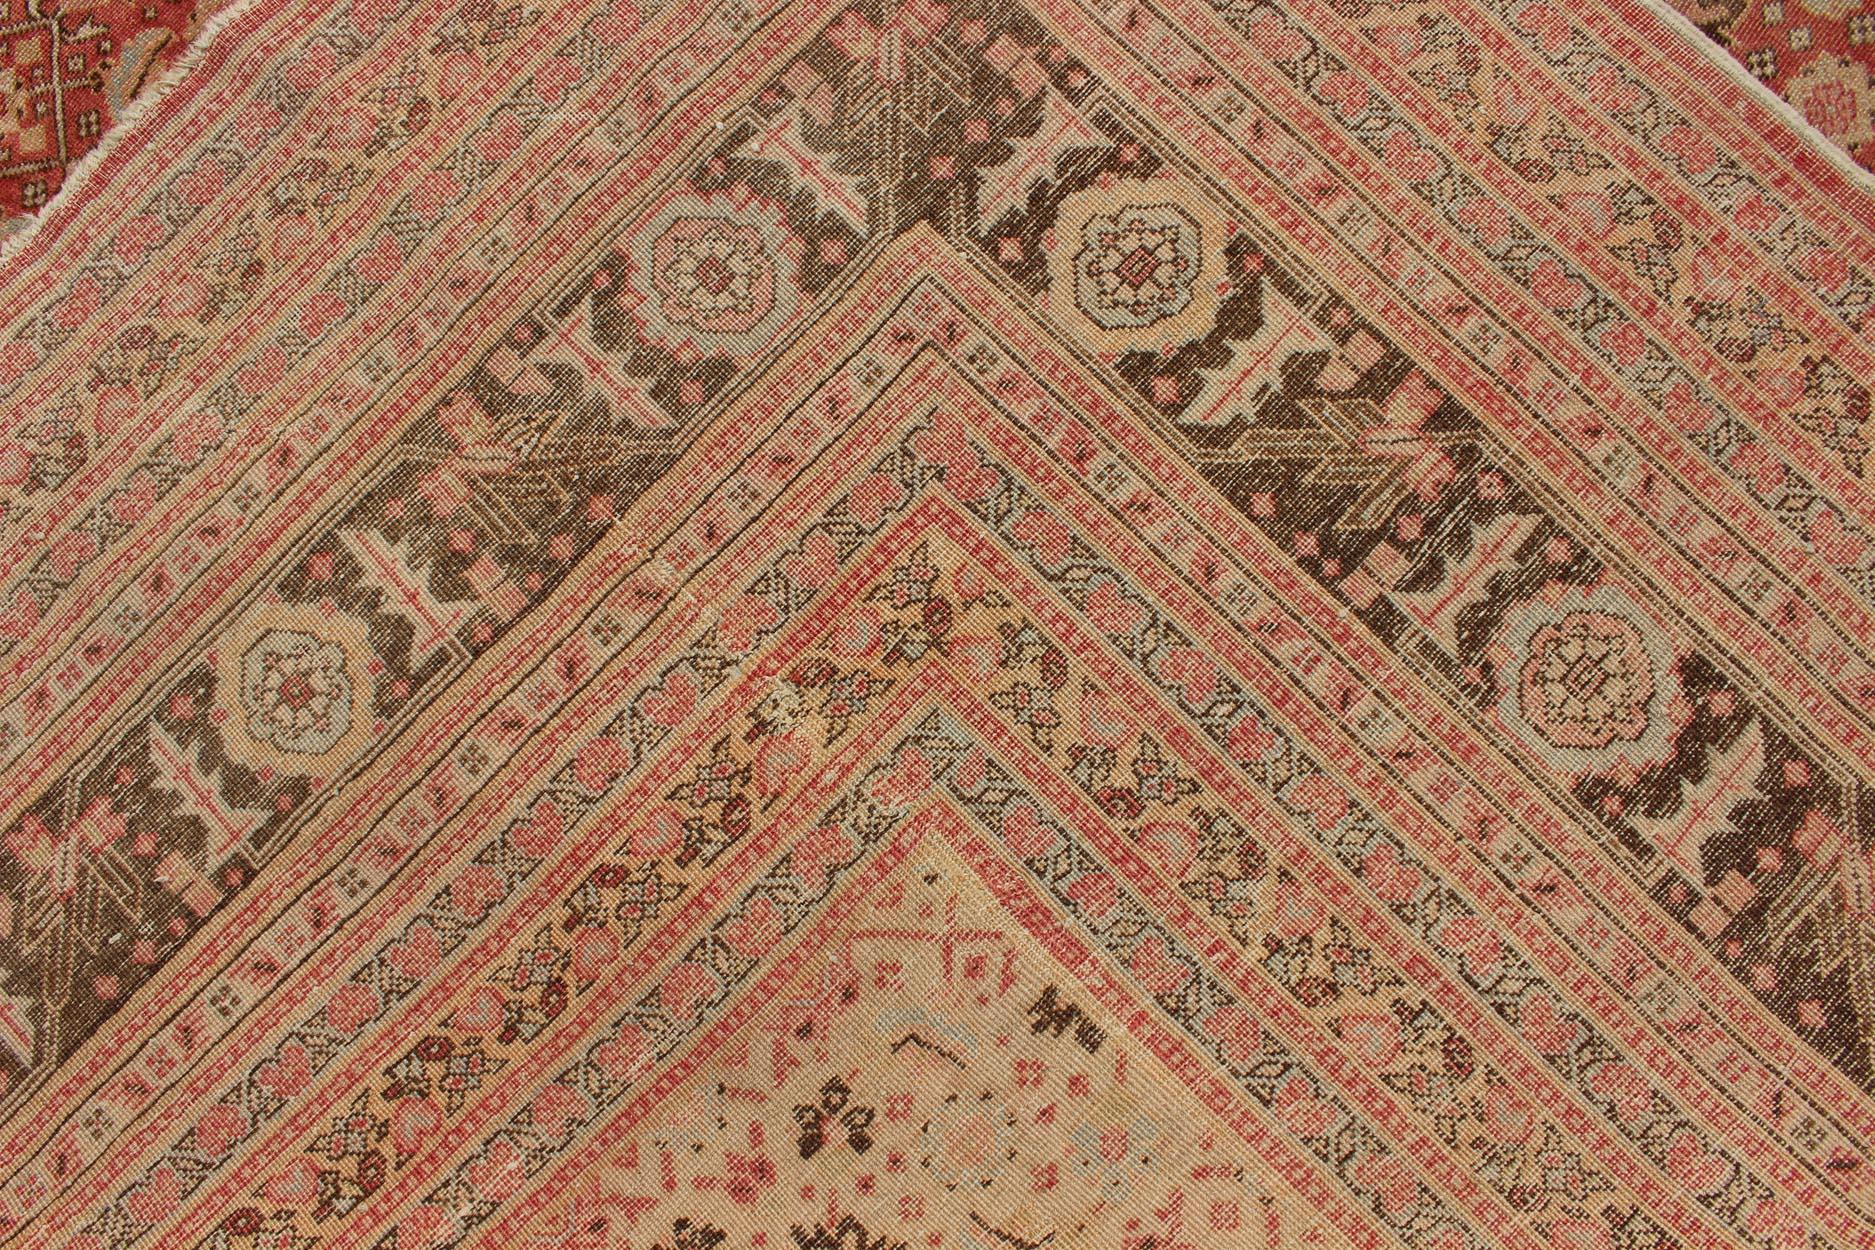 Antique Persian Tabriz Rug with Medallion Design in Coral, Cream and Brown Tones For Sale 9